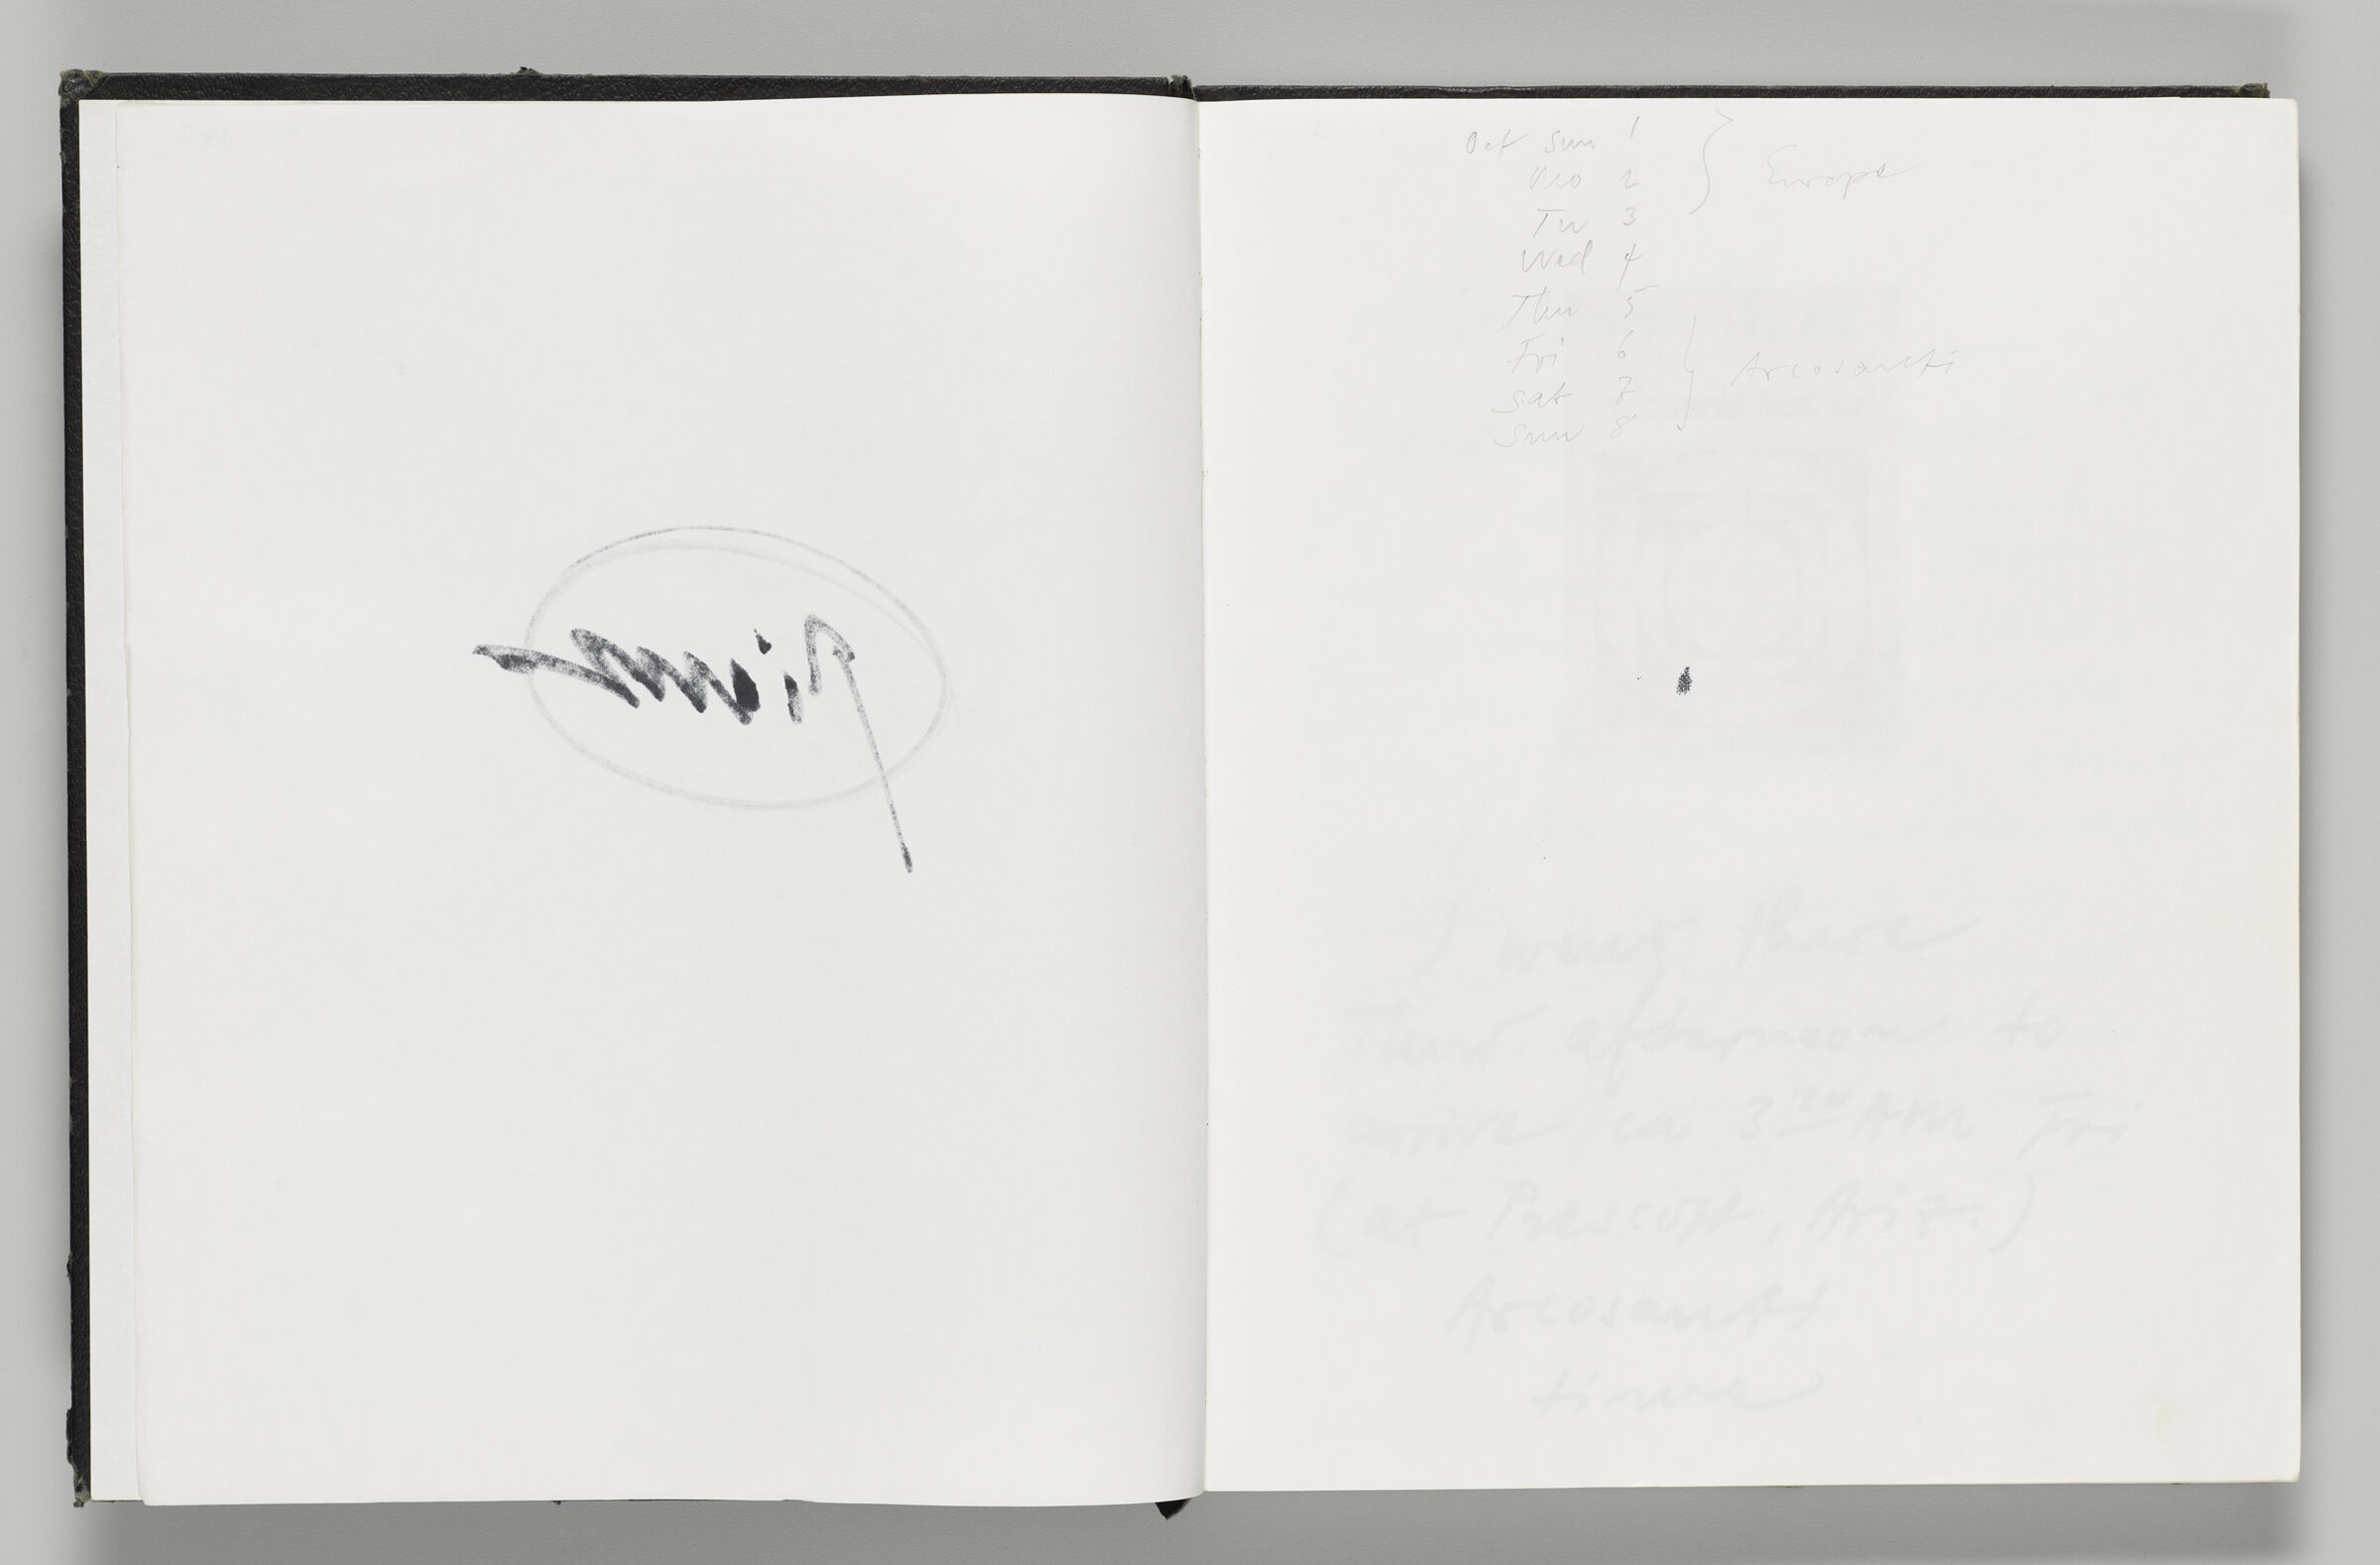 Untitled (Bleed-Through Of Previous Page, Left Page); Untitled (Itinerary Note, Right Page)